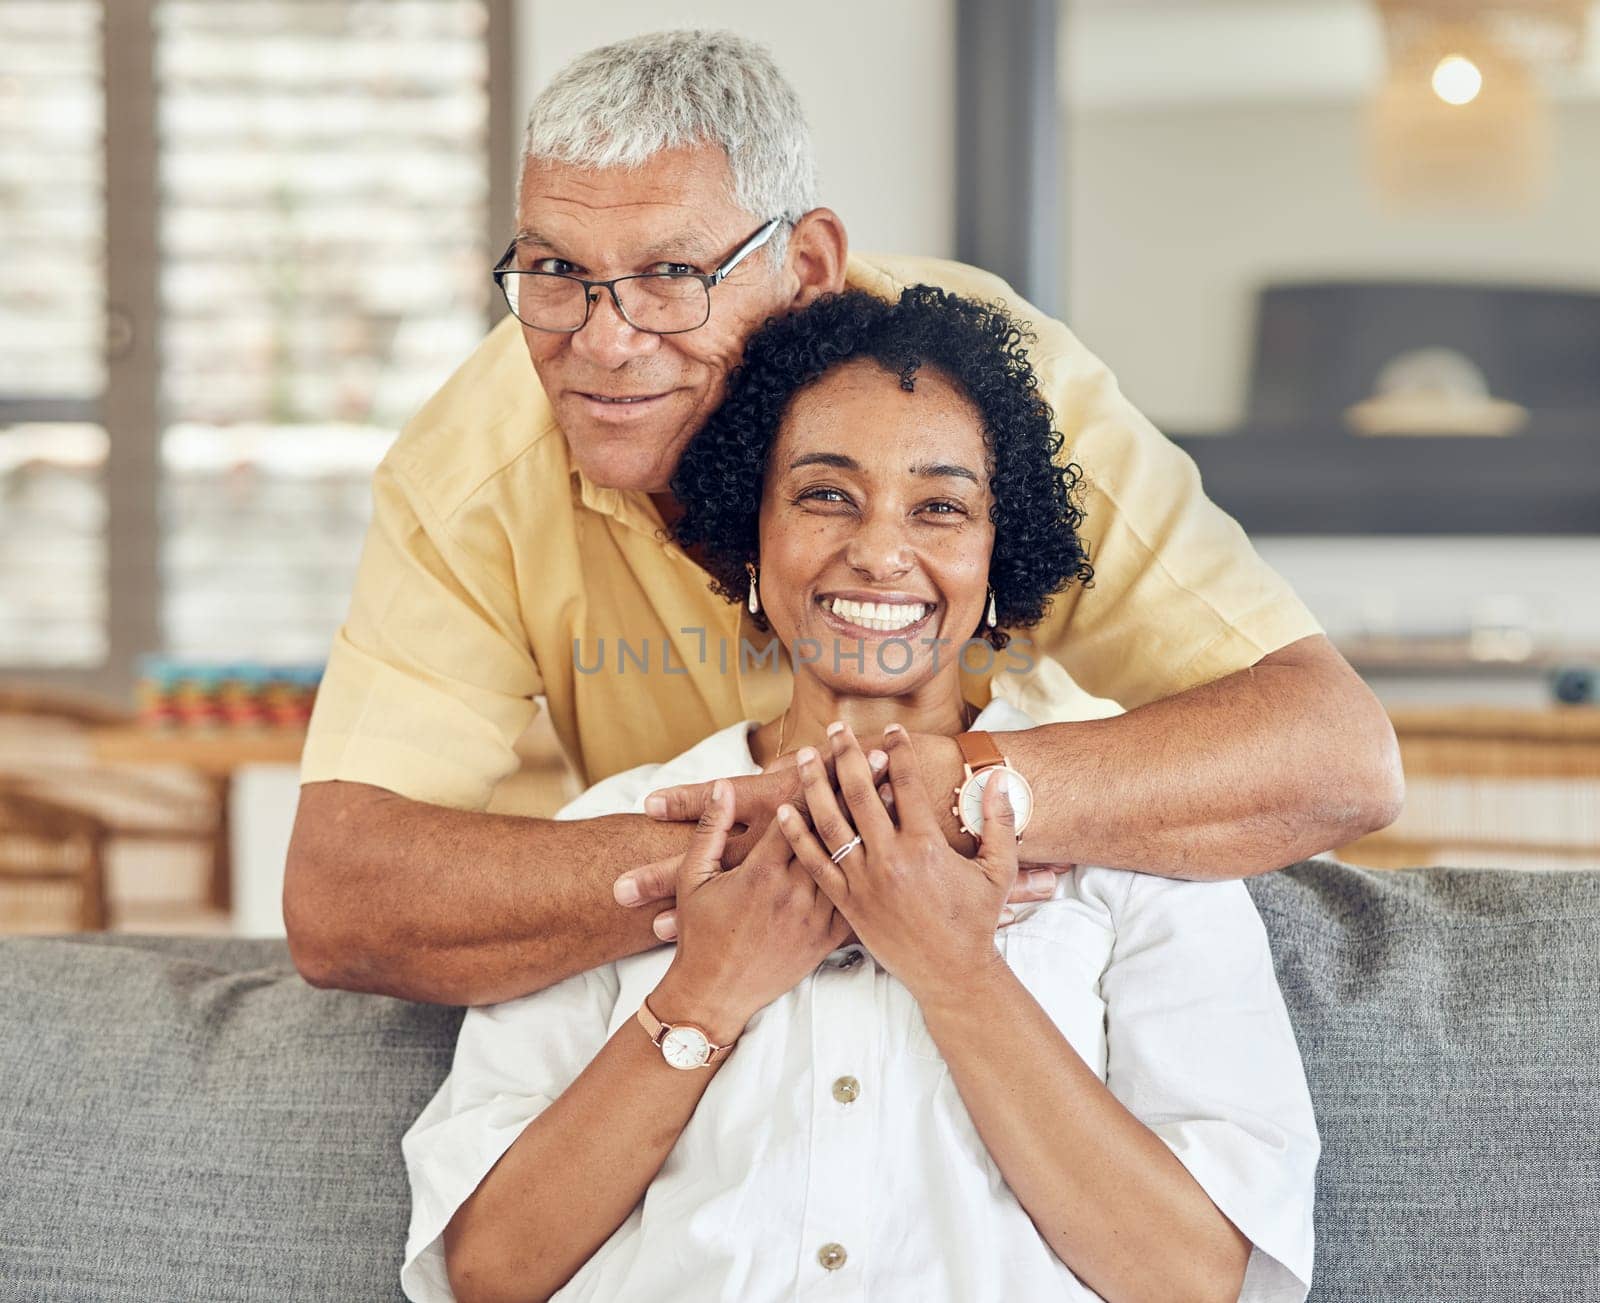 Portrait, relax and senior happy couple hug, care and enjoy quality time together on home living room sofa. Retirement happiness, marriage love bond and romantic elderly husband, wife or people smile.